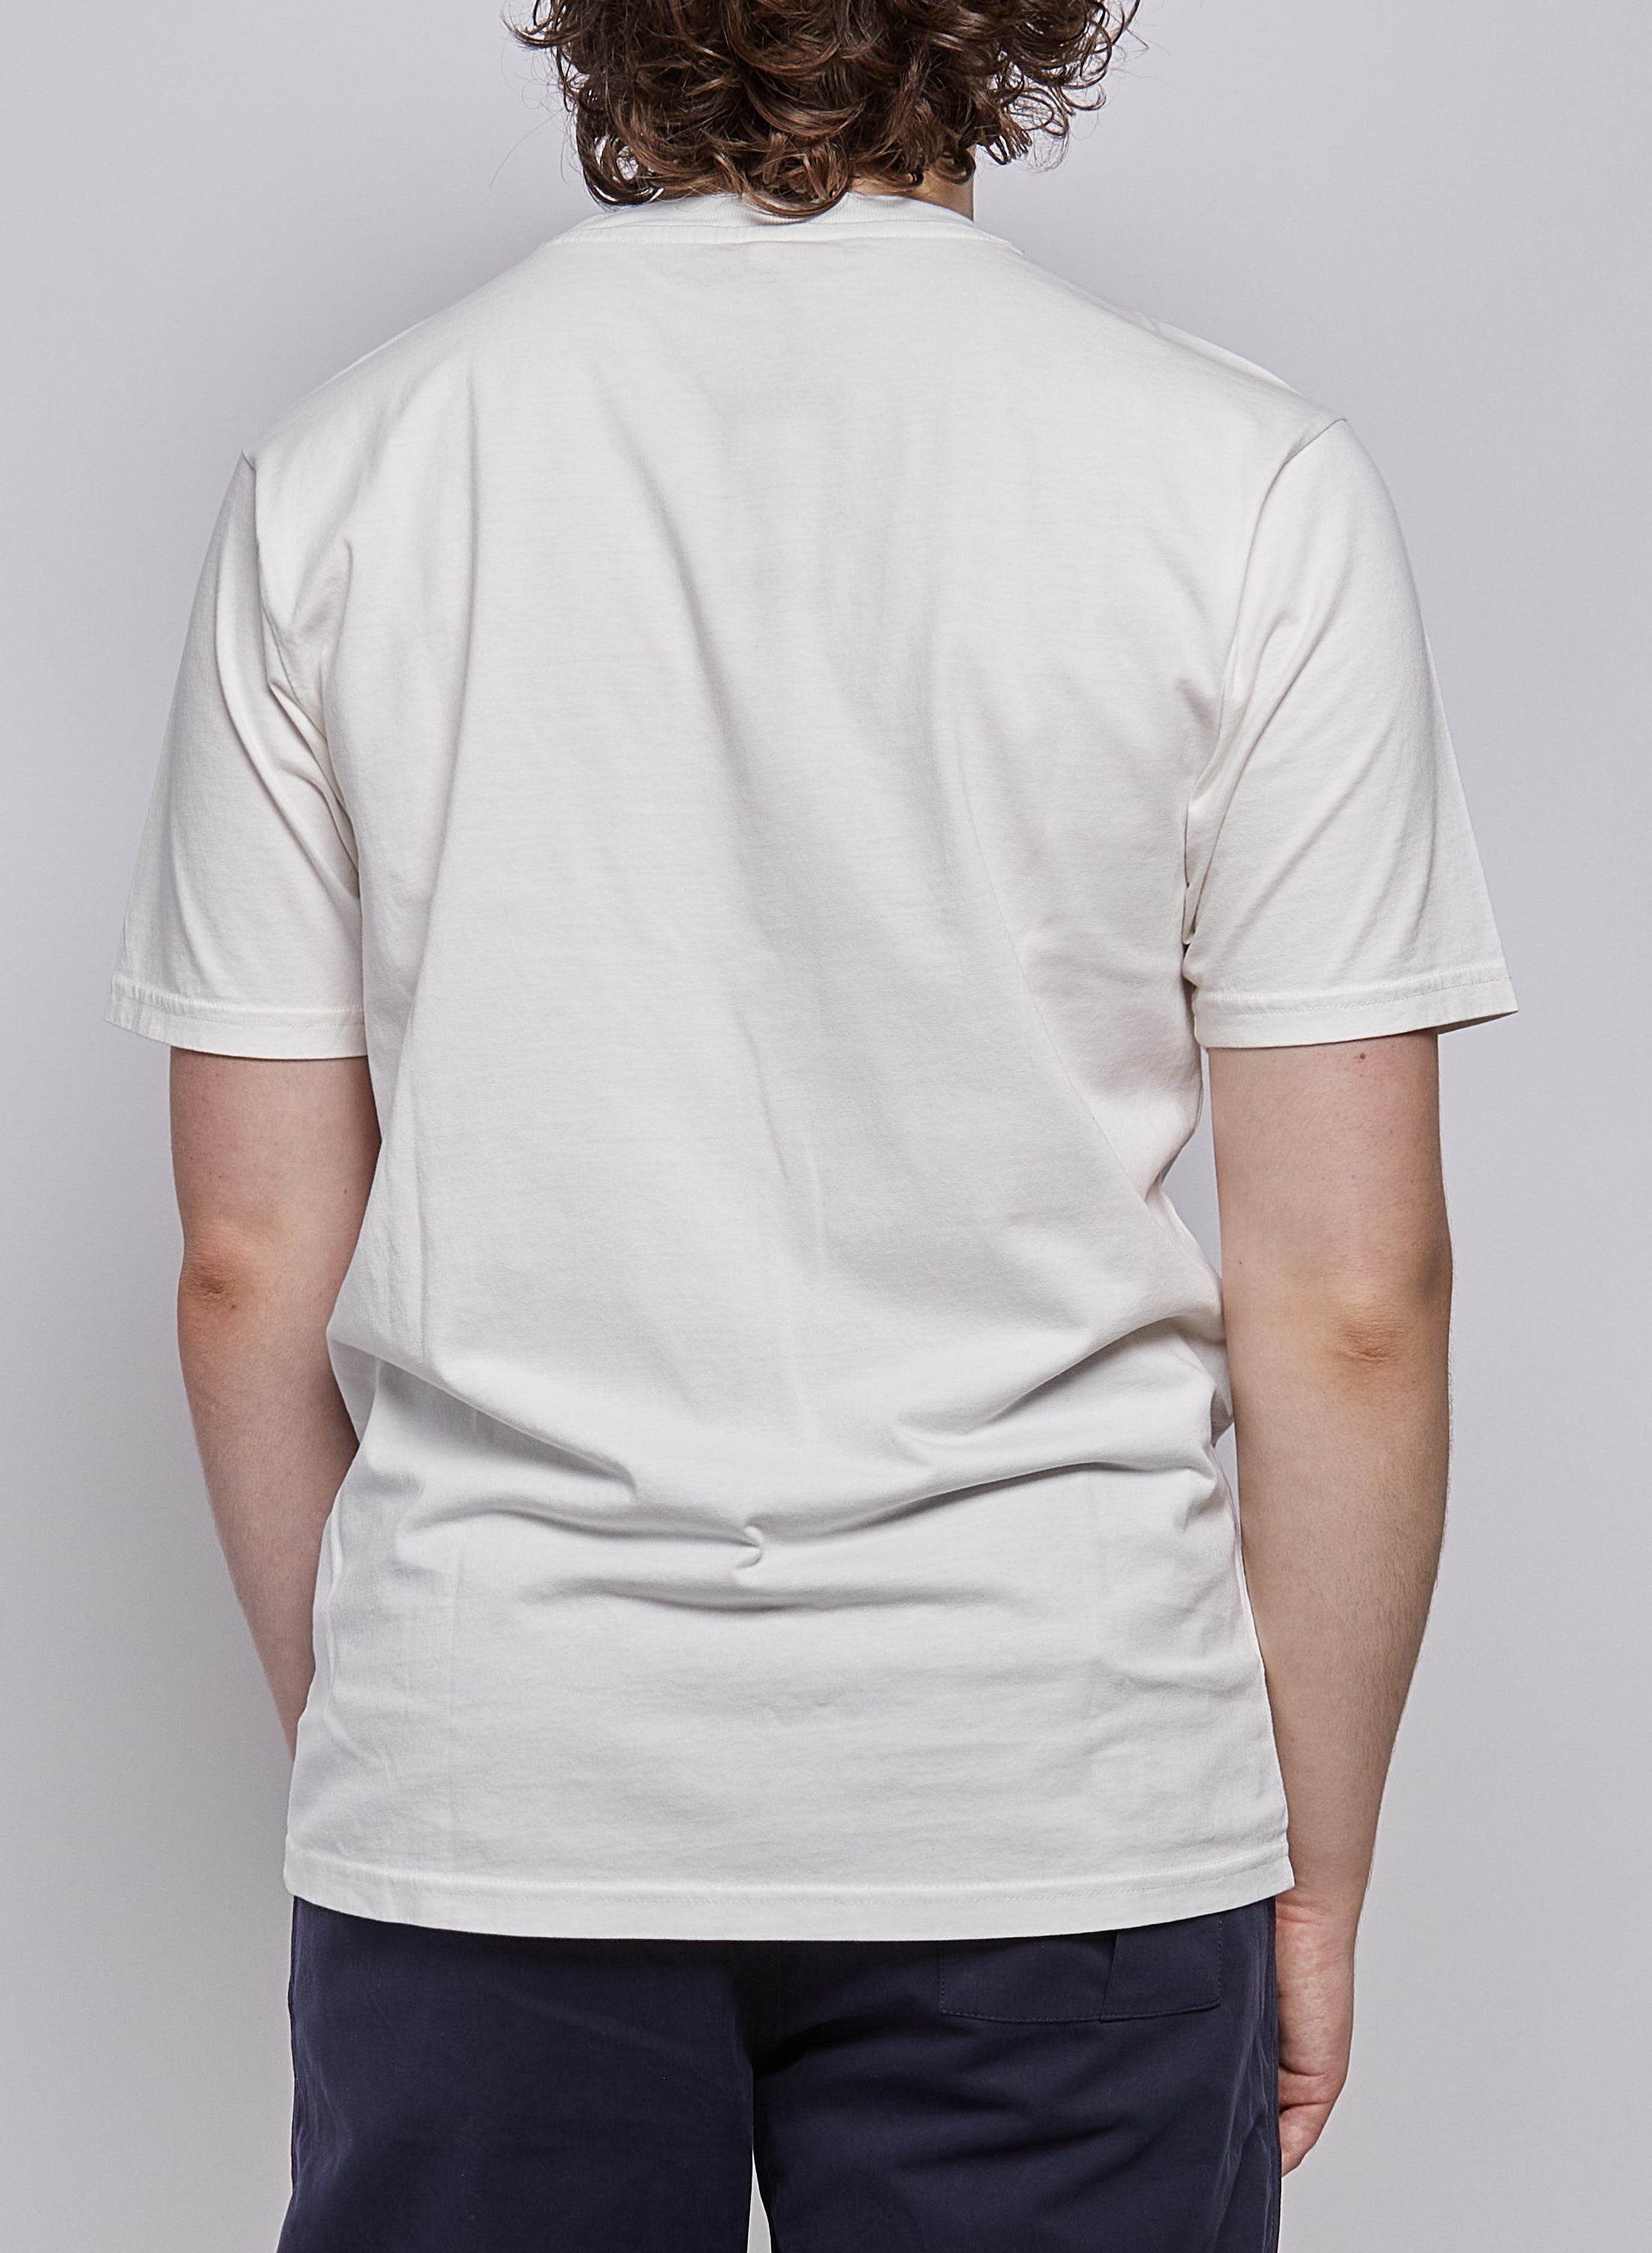 Classic Relaxed Fit Tee in Stone Wash White - 4